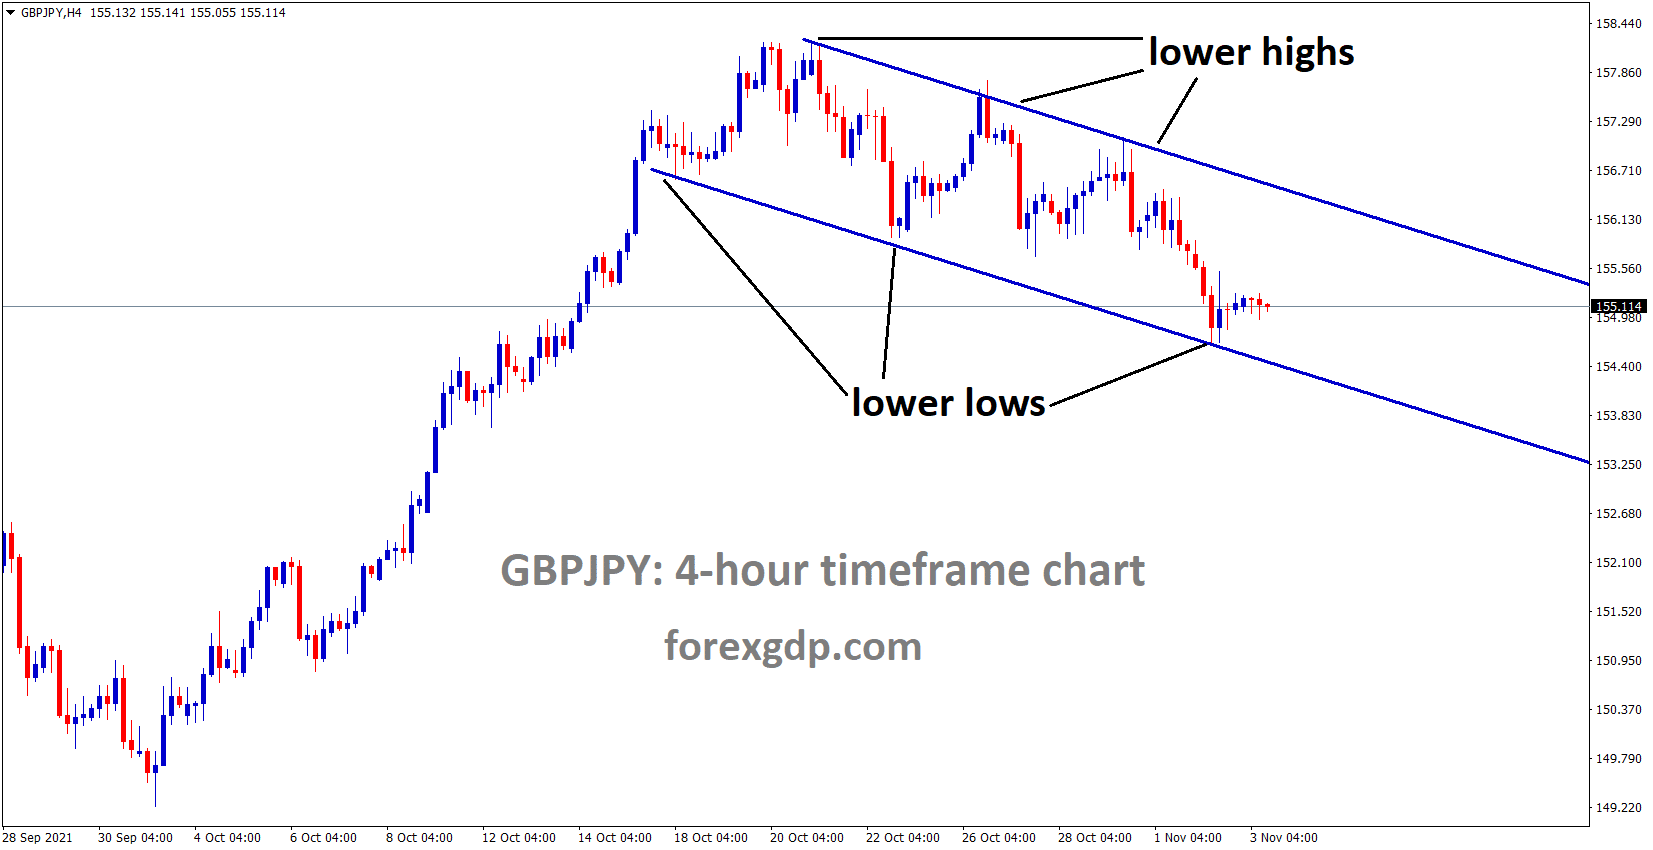 GBPJPY is moving in the Descending channel and the market is rebounded